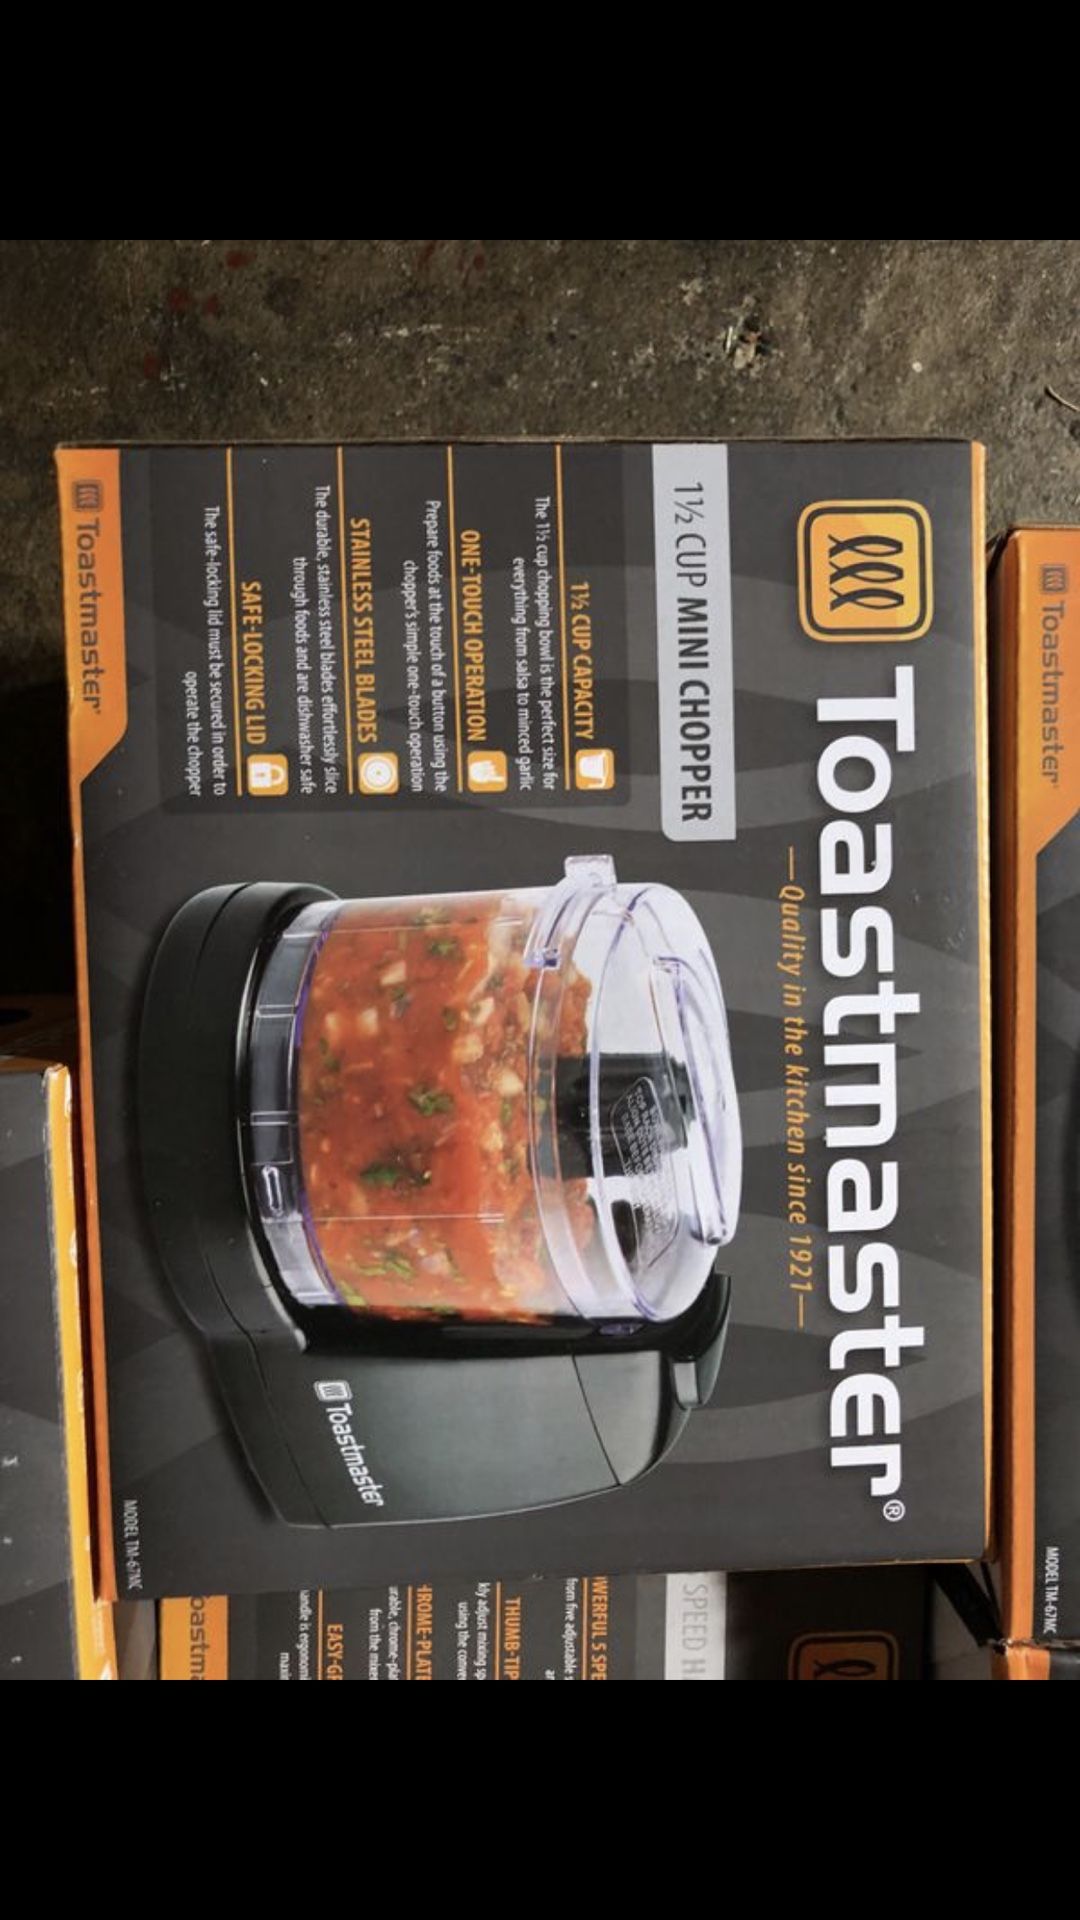 Toastmaster Mini chopper 1 1/2 cup Brand New